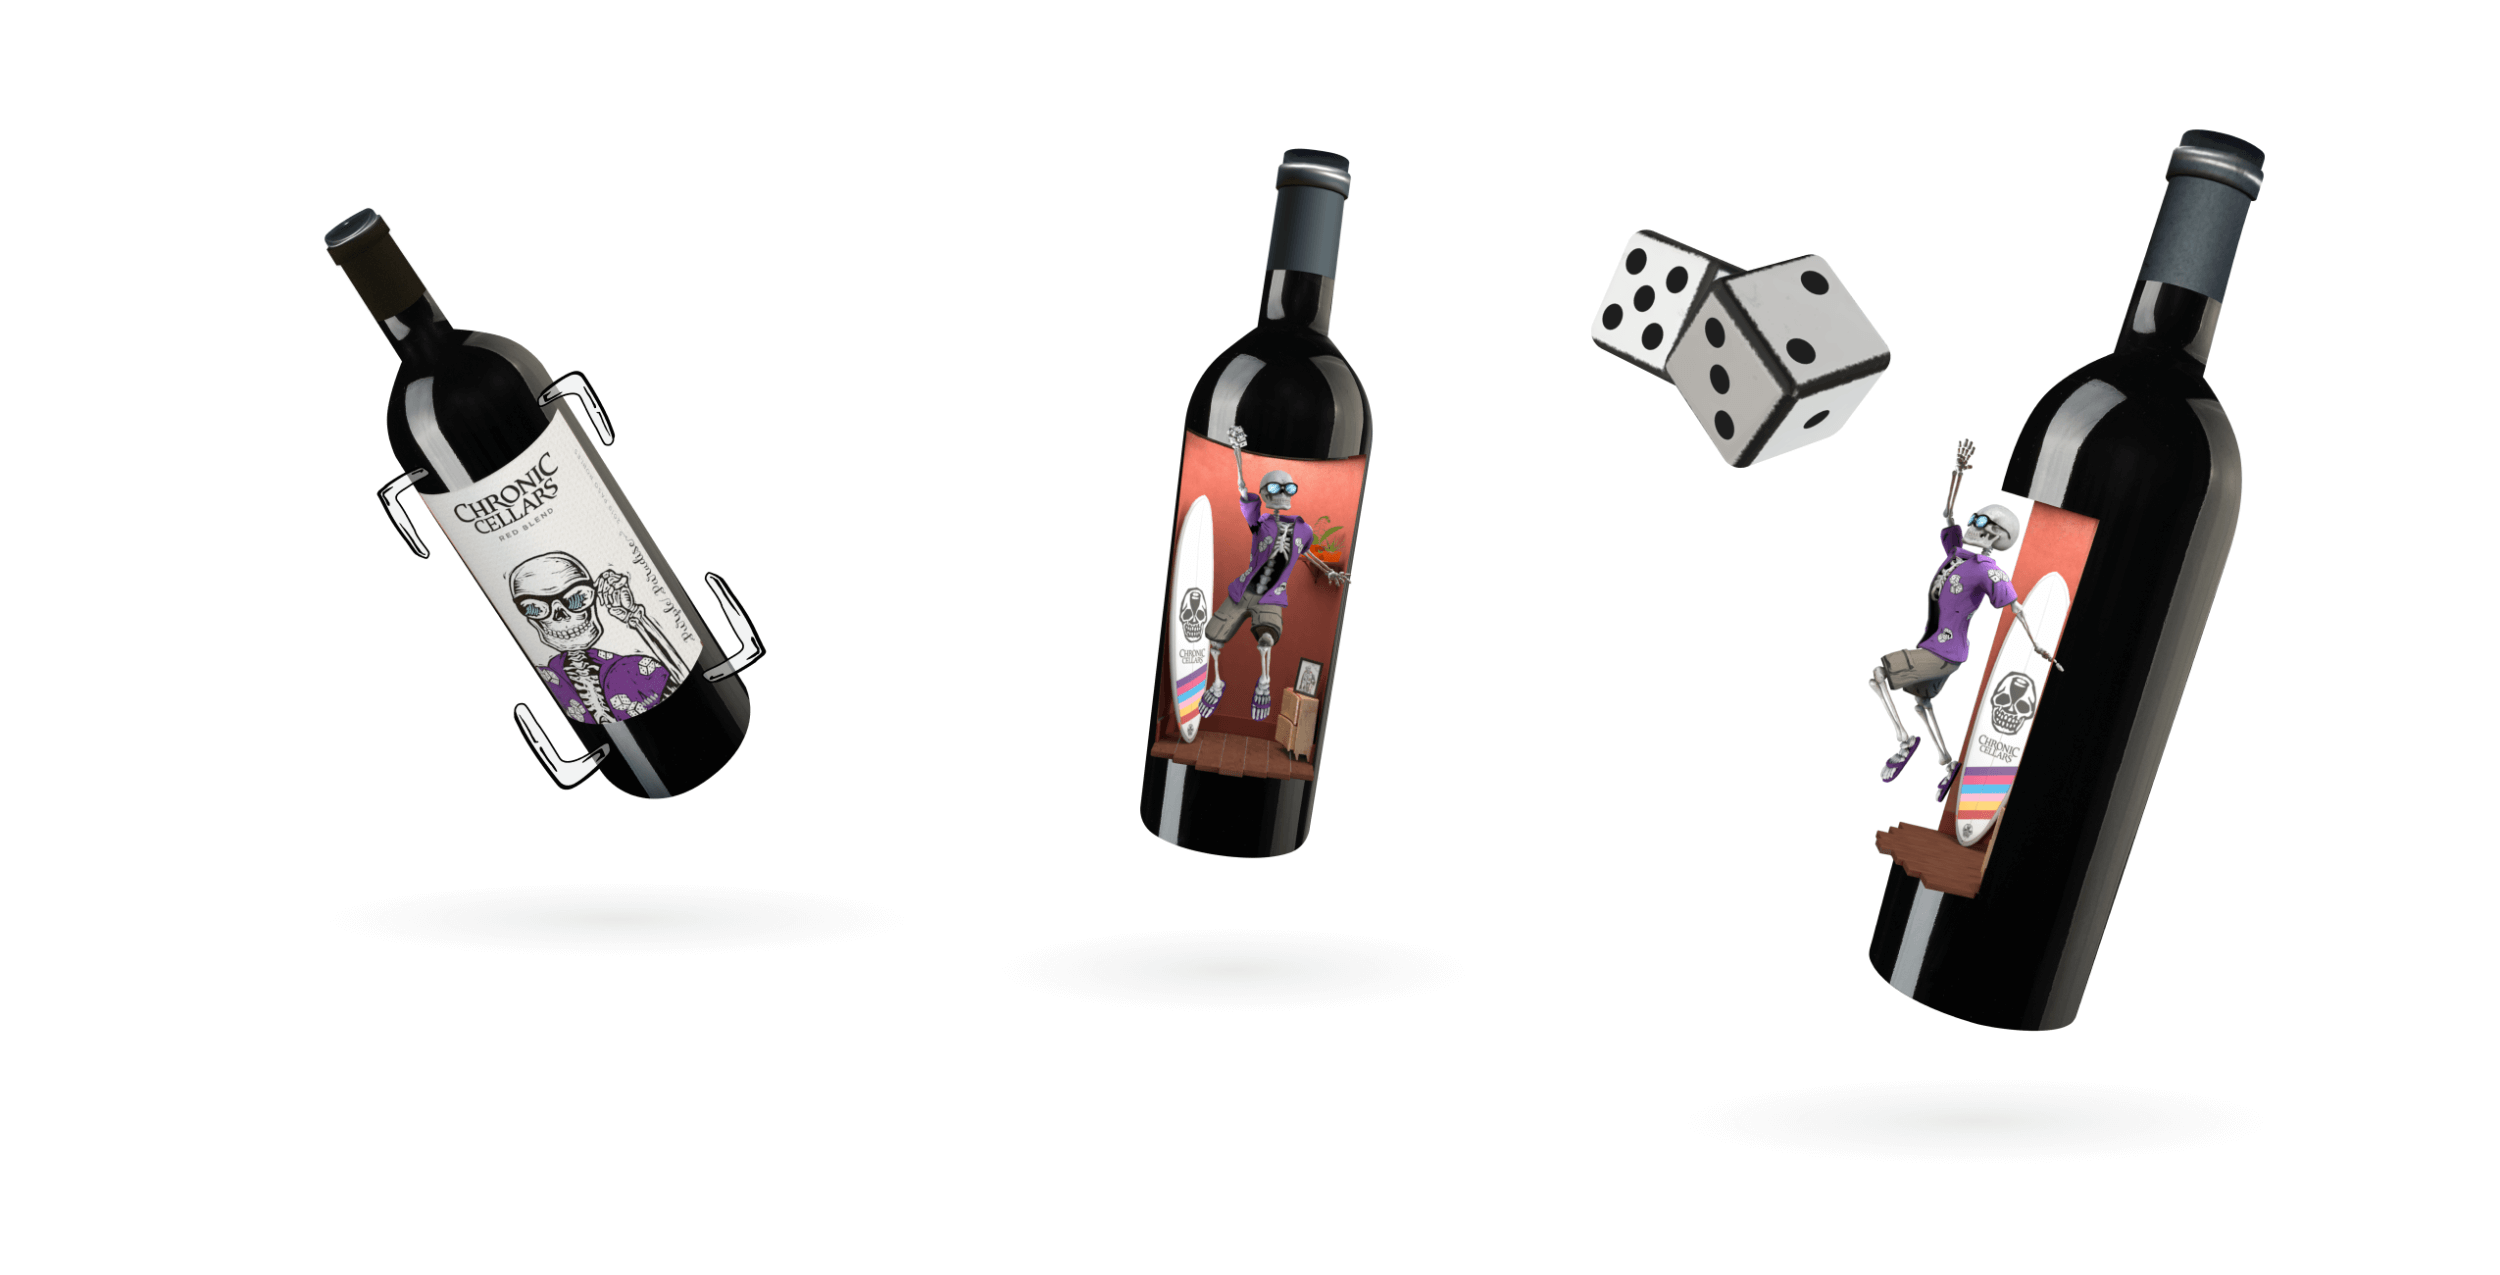 Chronic Cellars - Hero Image - Tracking Image - Wine Bottle - Packaging - Skeleton - Purple - Environment - AR - Augmented Reality - Dice - Motion - Surf Board